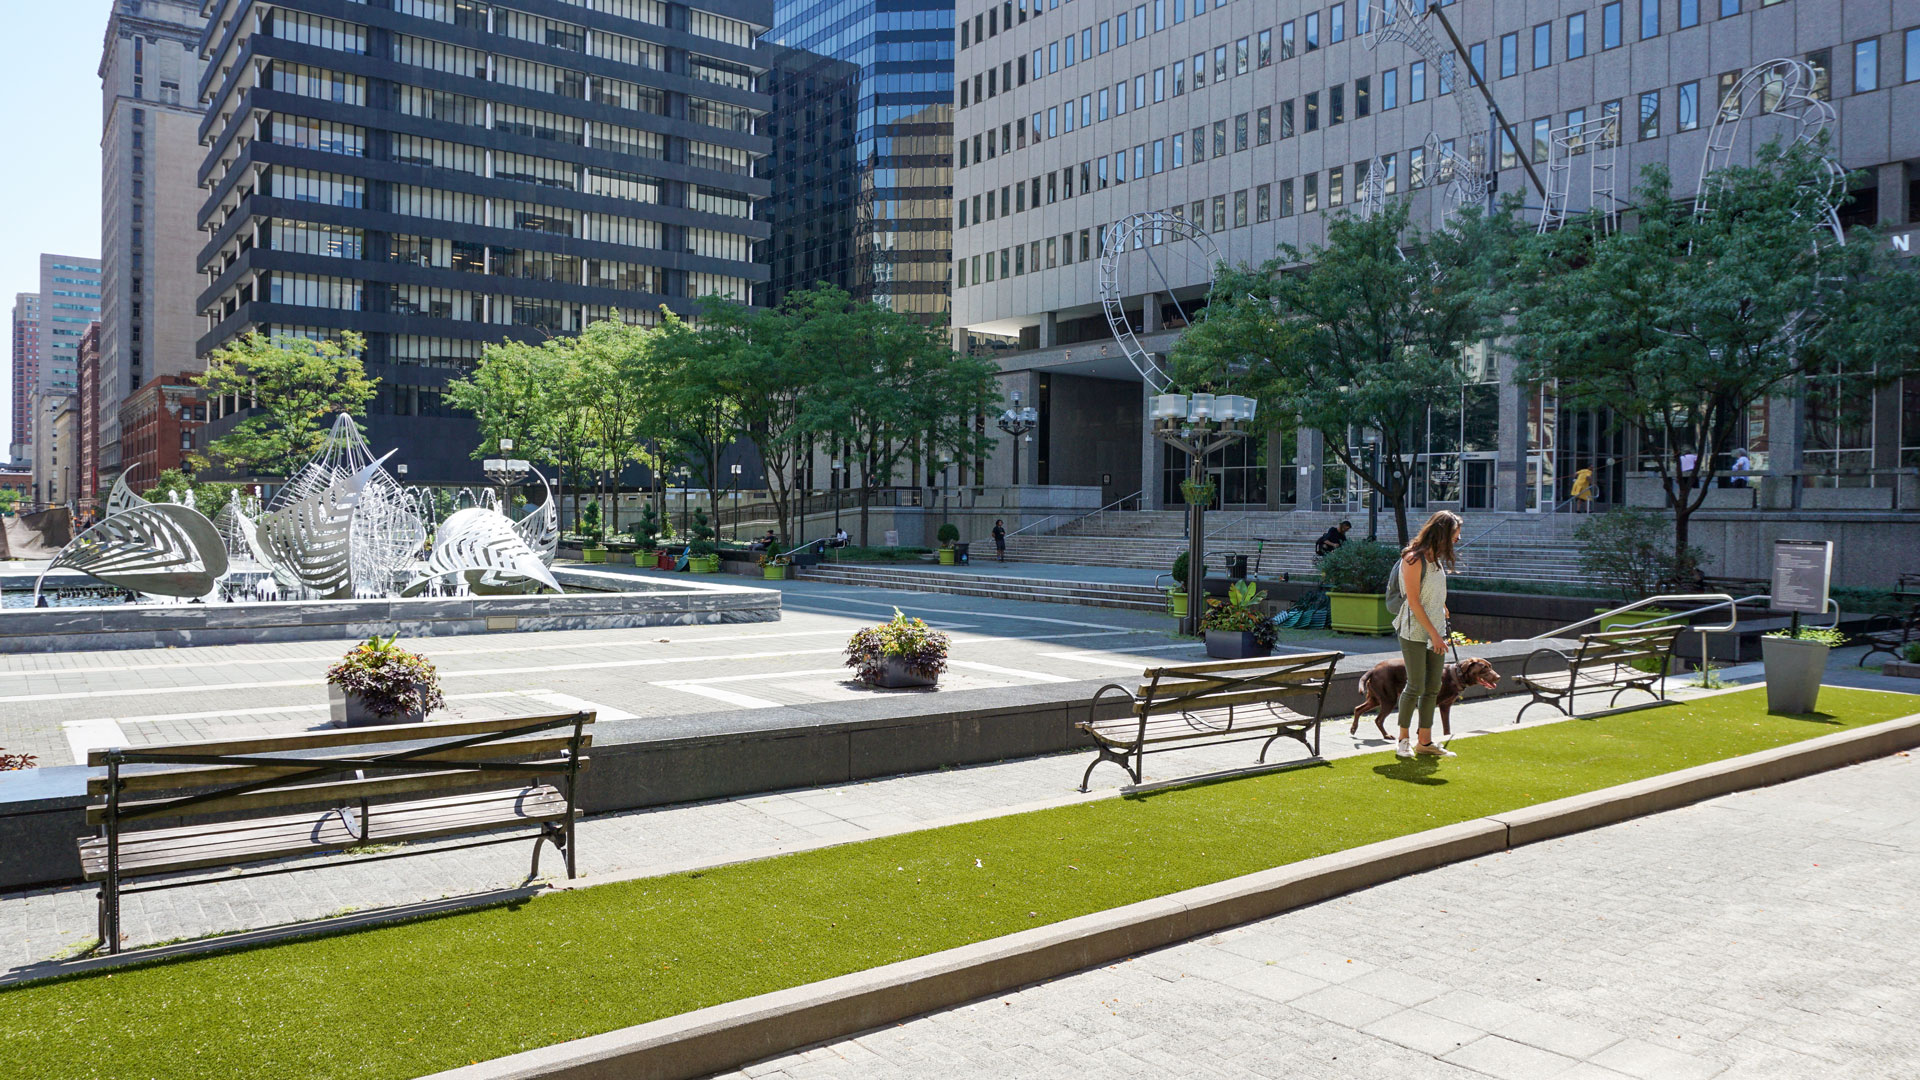 Wide angle view of Downtown Baltimore's Hopkins Plaza. Woman walking her chocolate lab on the grass dog run area, fountain and sculpture in background.